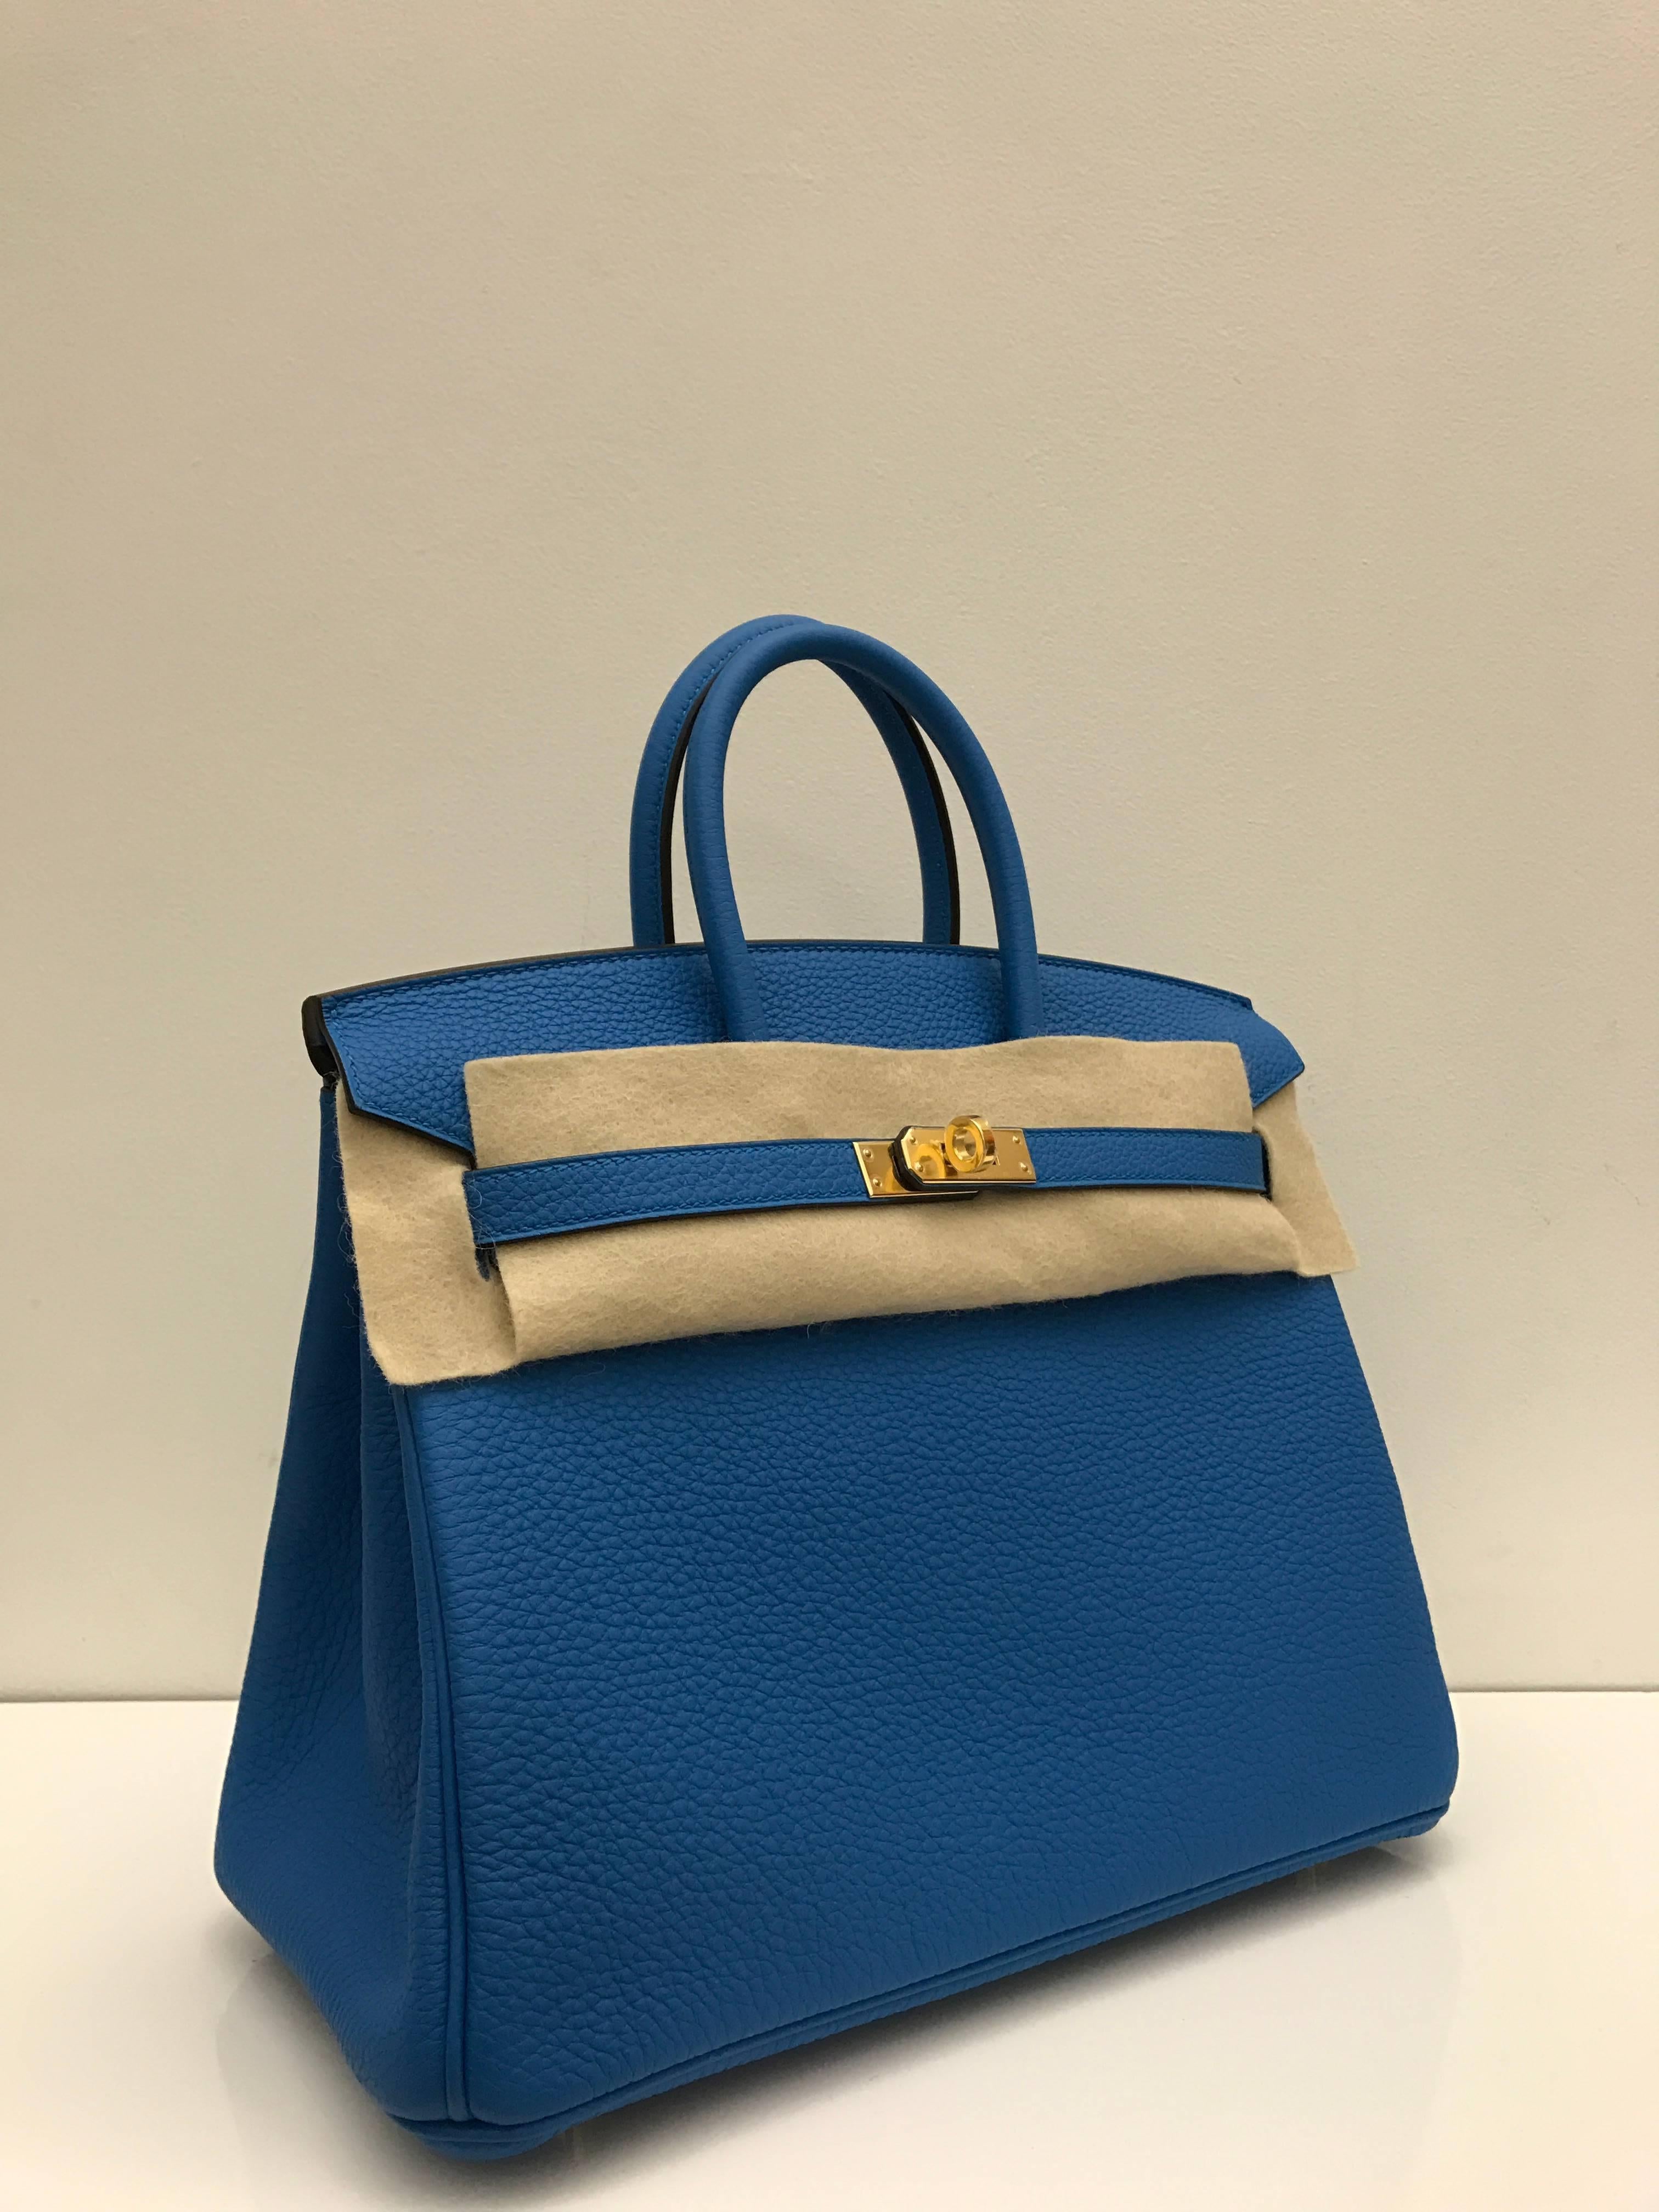 Hermes 
Birkin Size 25
Togo Leather 
Blue Zanzibar Colour
Gold Hardware
Store fresh, comes with receipt and full set (dust bag, box...) 
Hydeparkfashion specializes in sourcing and delivering authentic luxury handbags, mainly Hermes, to clients